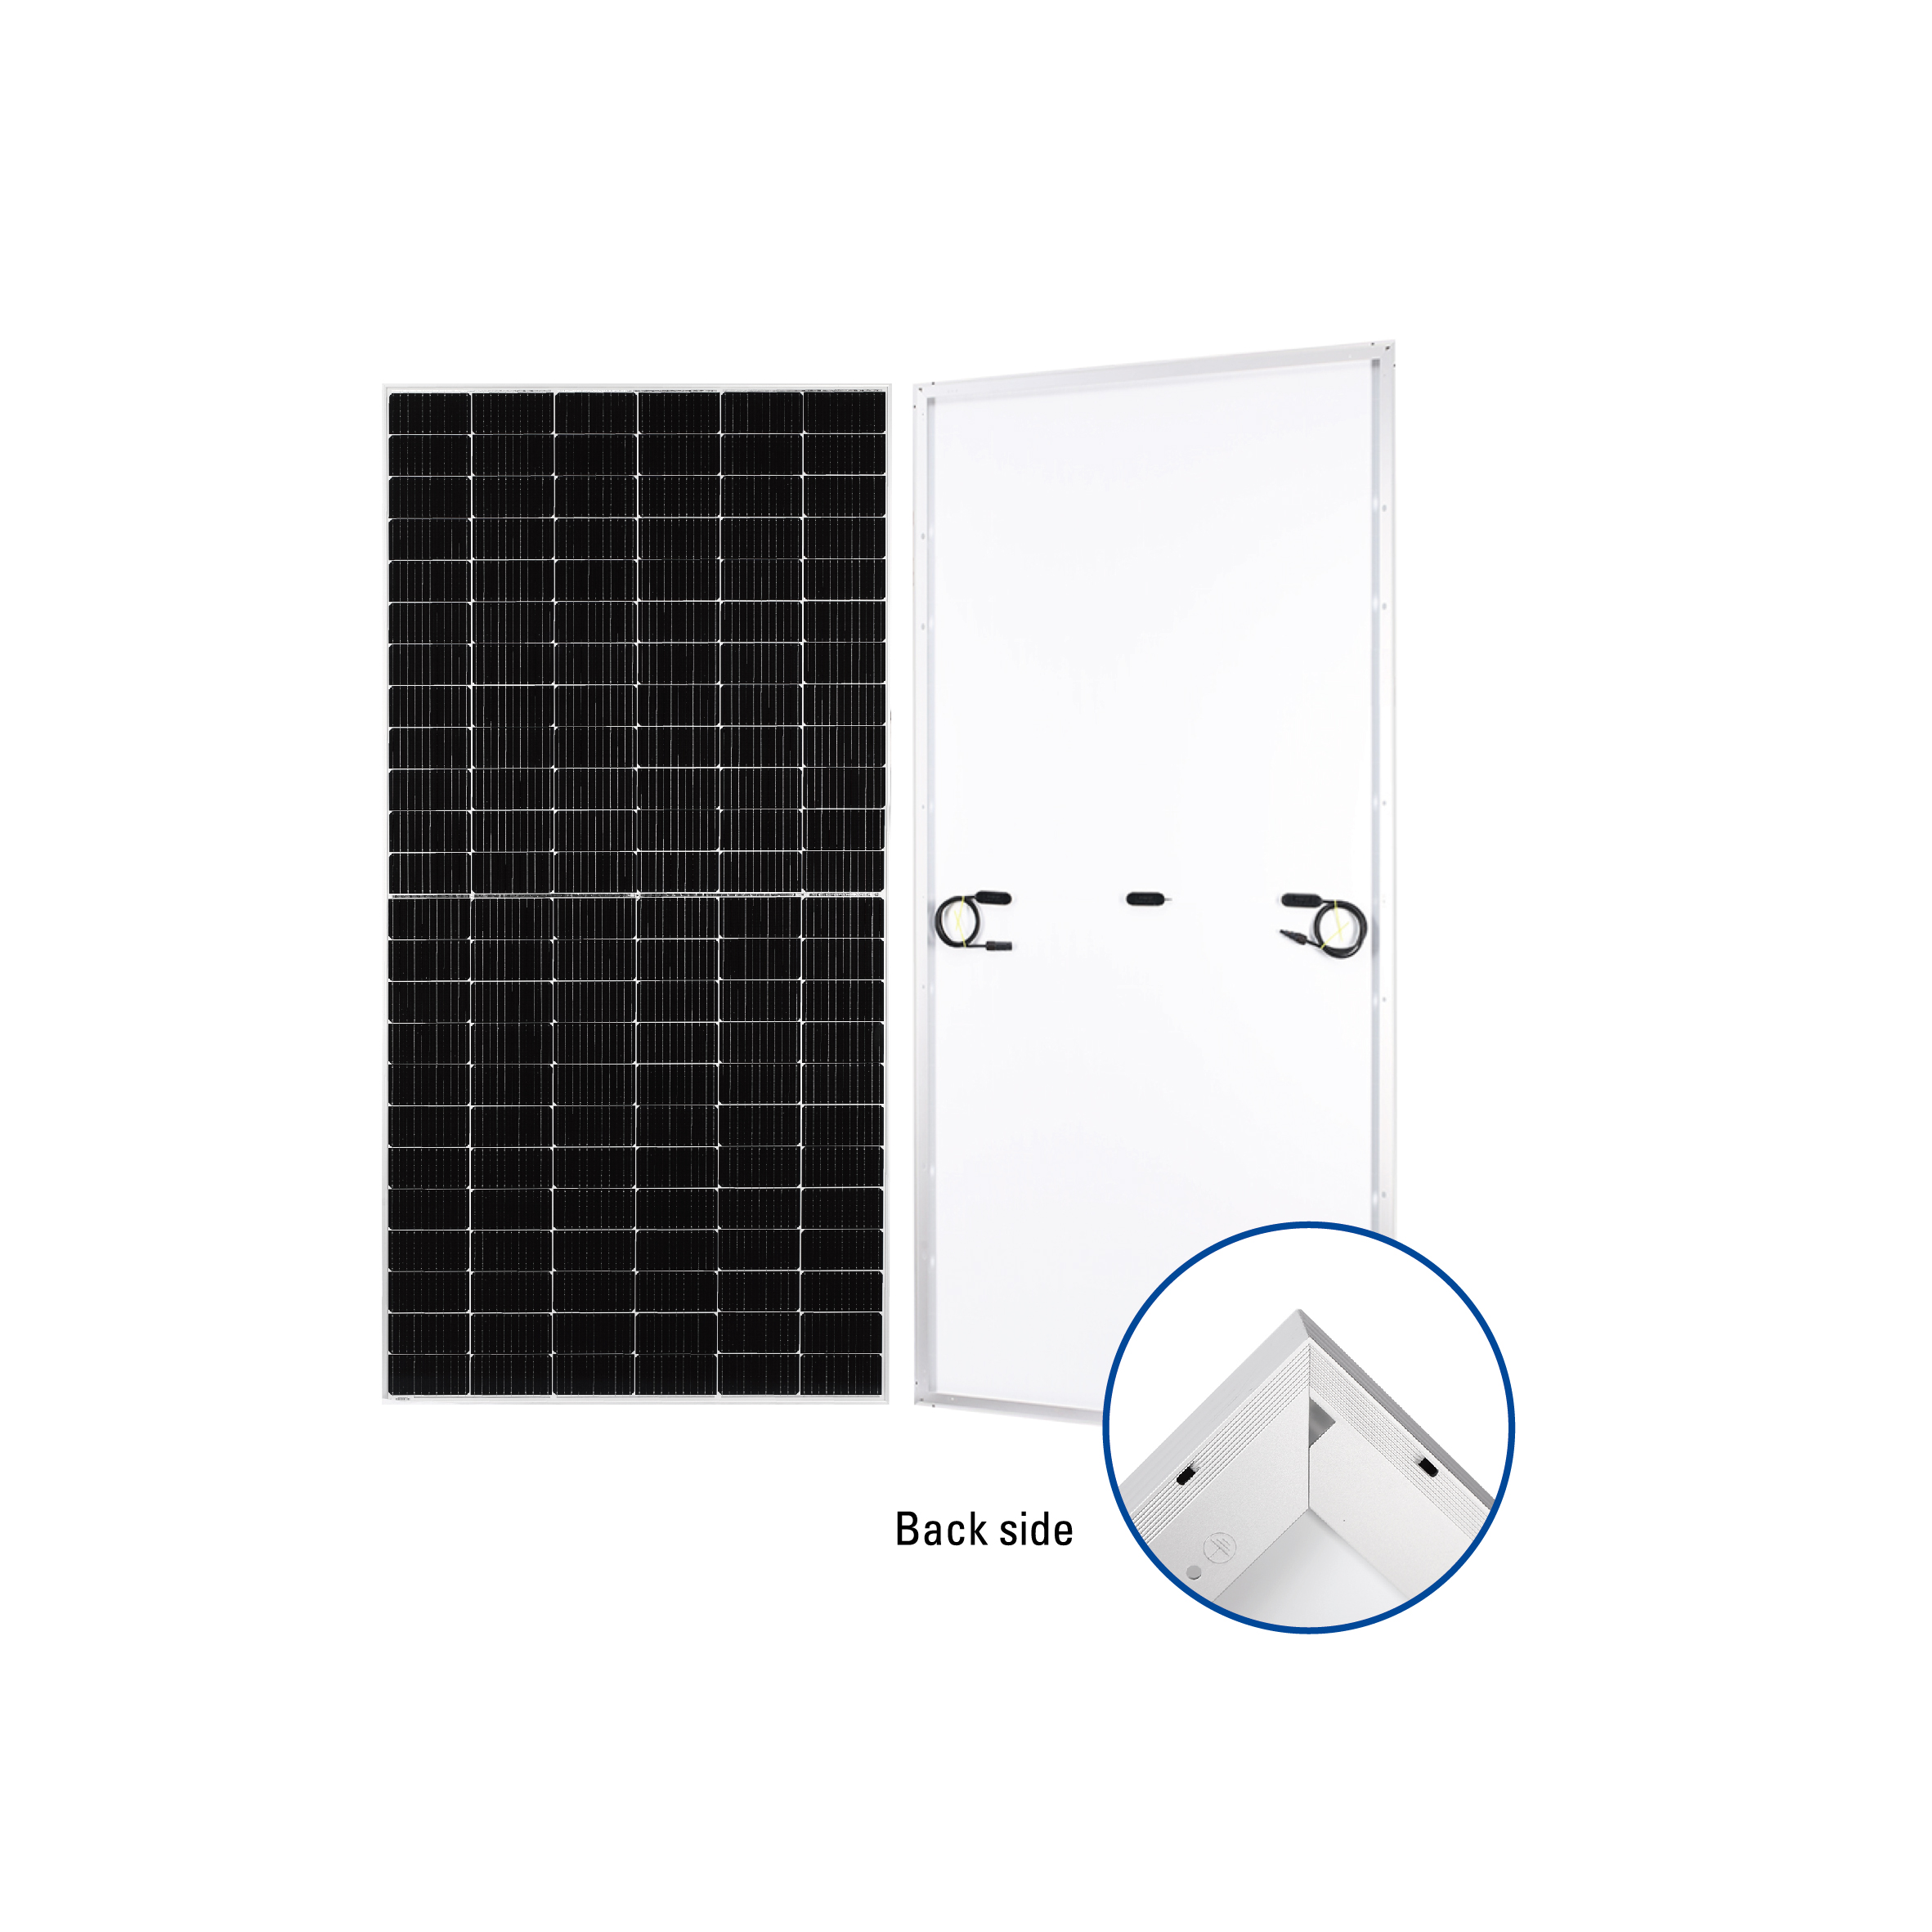 High efficiency High Power PV module with Lowes...